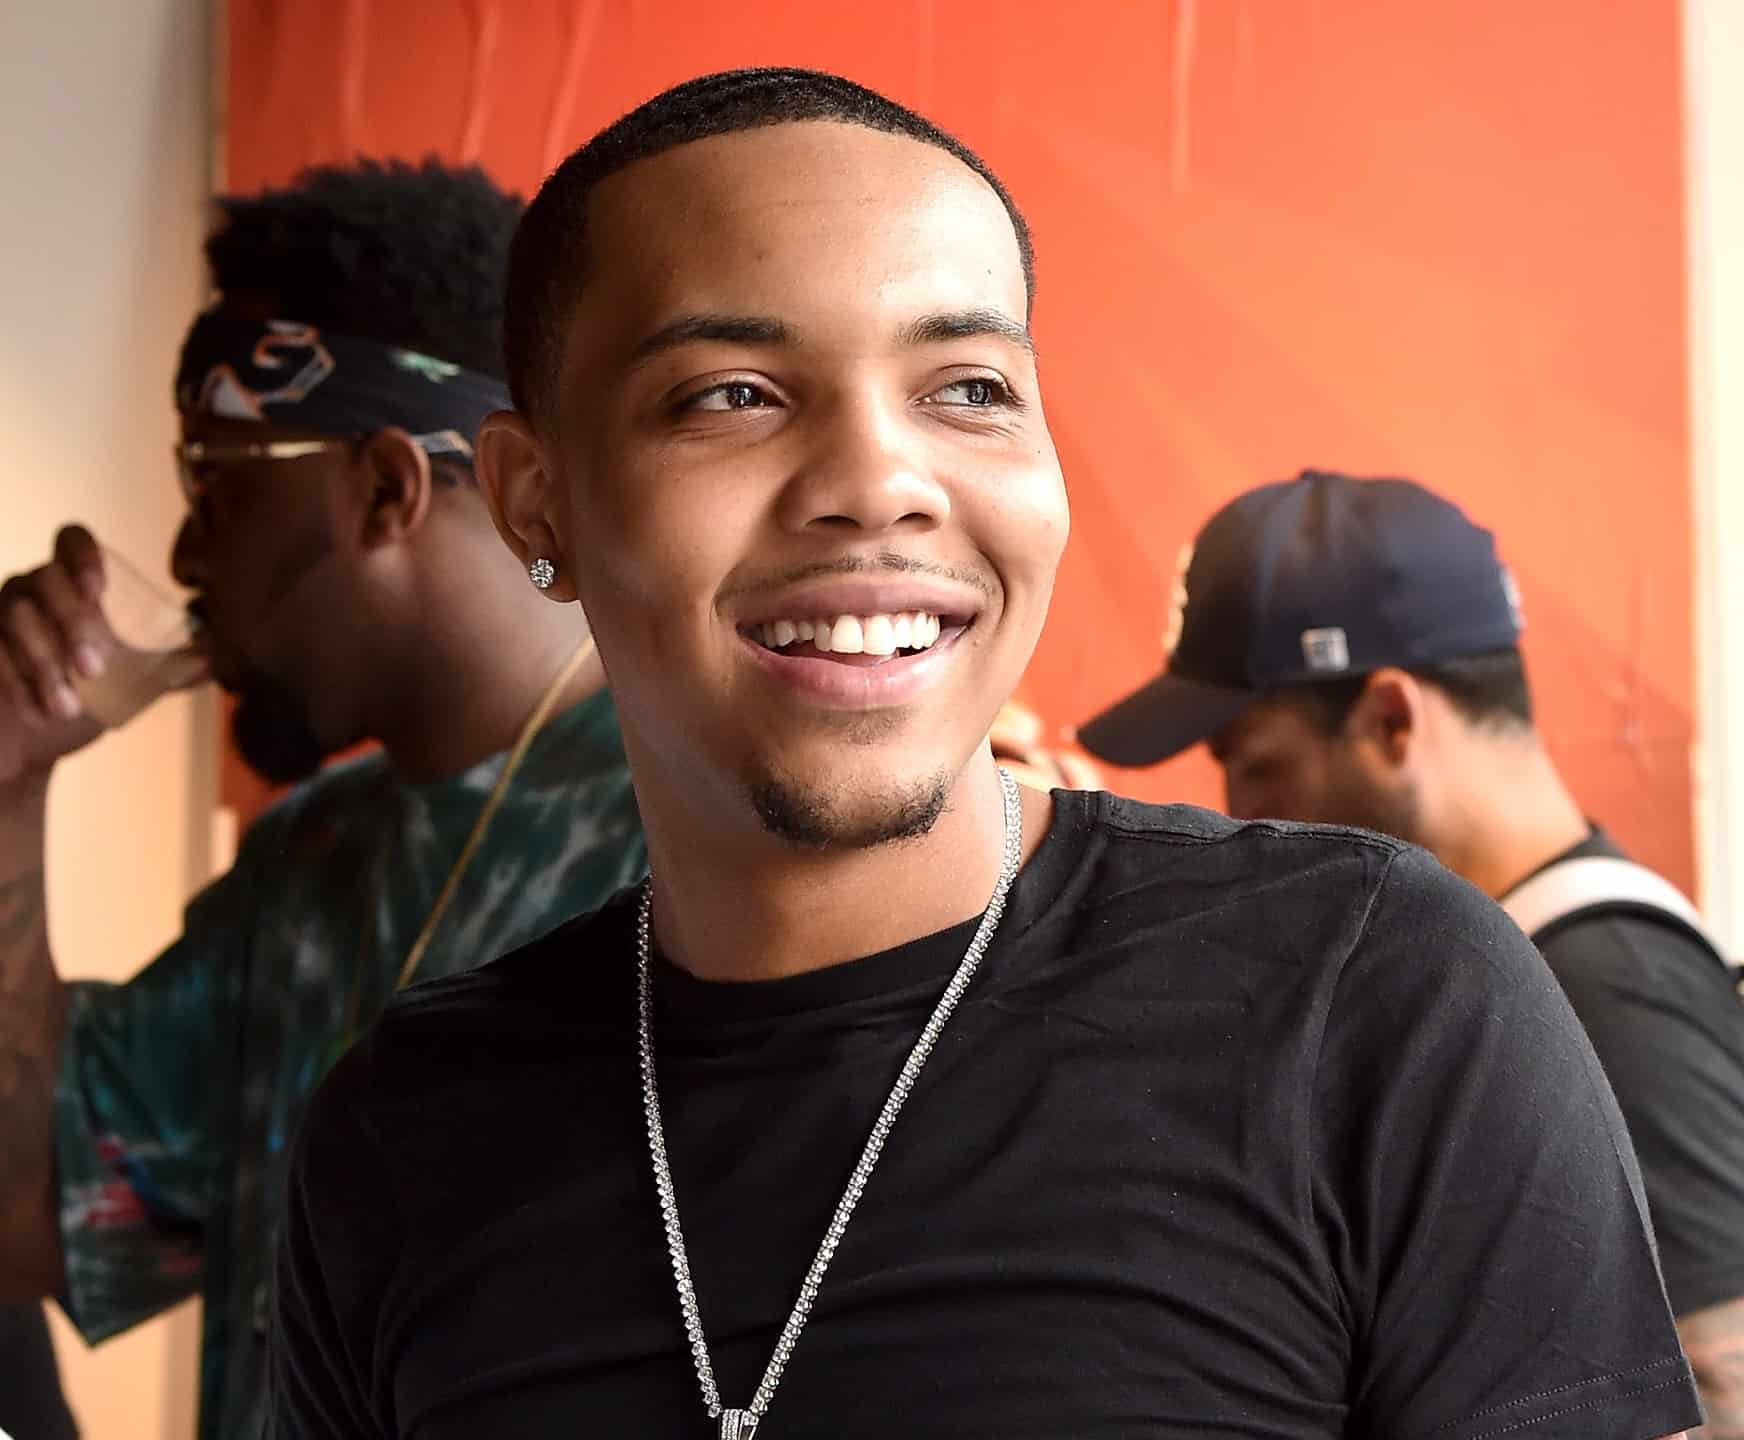 TSR Exclusive: G Herbo's Team Releases Statement Regarding Indictment, "He Maintains His Innocence And Looks Forward To Establishing His Innocence In Court"